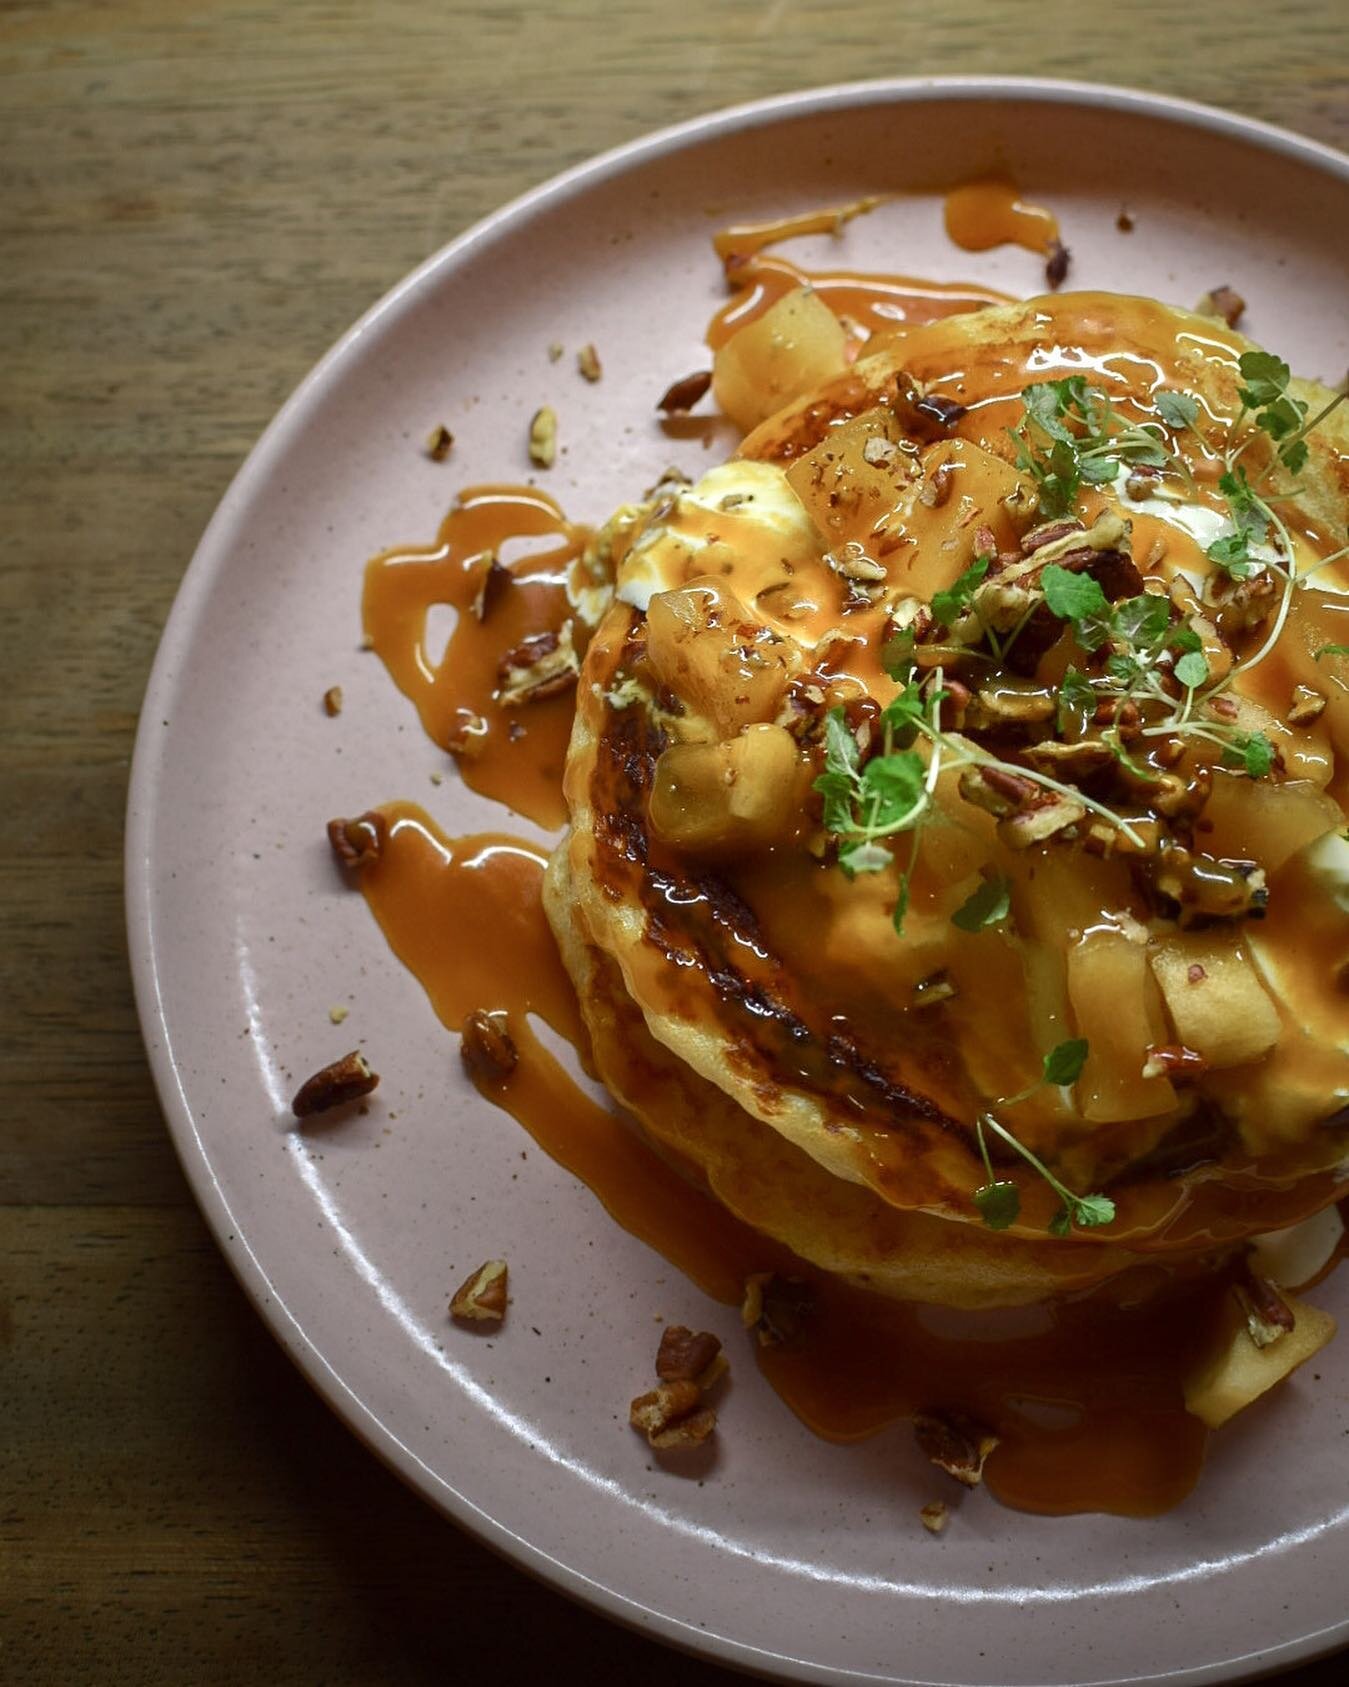 Come get cozy with us with our winter special 🥞 
Soft and fluffy buttermilk pancakes, apple compote, vanilla mascarpone, miso caramel and toasted pecans
.
.
.
.
#thelowdowncoventgarden #38bedfordstreet #coventgarden #brunch #winter #londonbrunch #lo